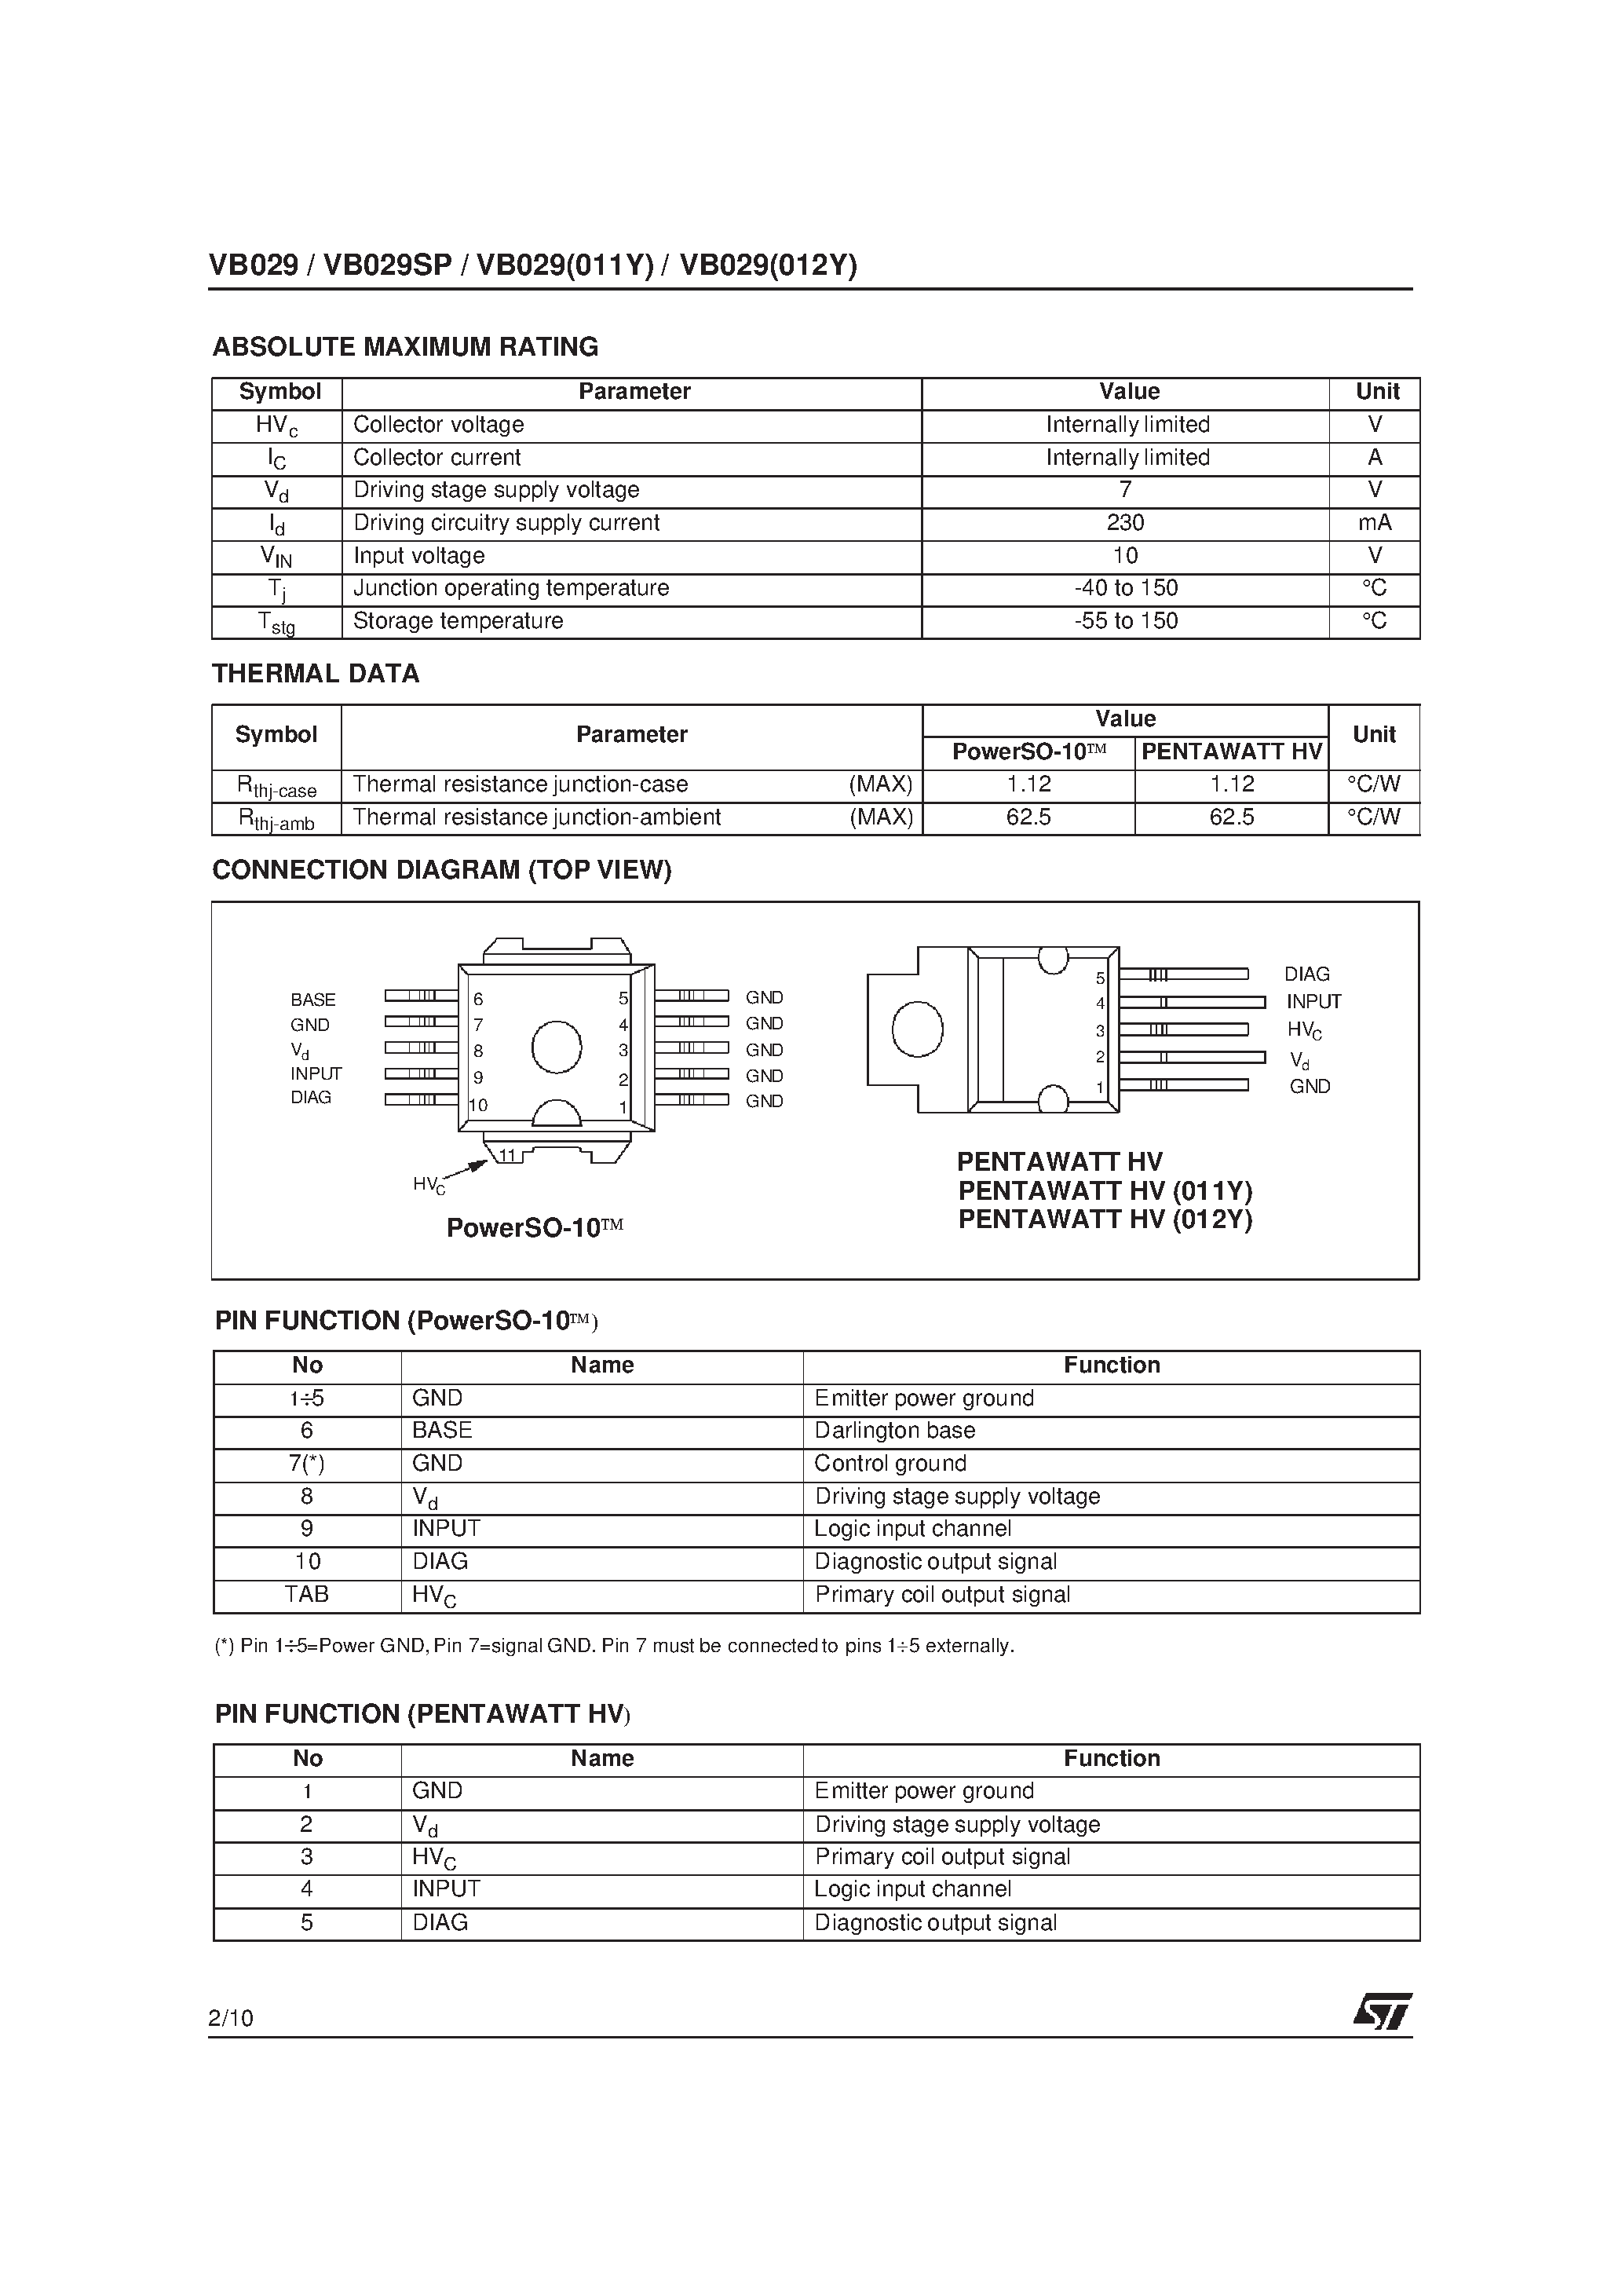 Datasheet VB029 - HIGH VOLTAGE IGNITION COIL DRIVER POWER I.C. page 2